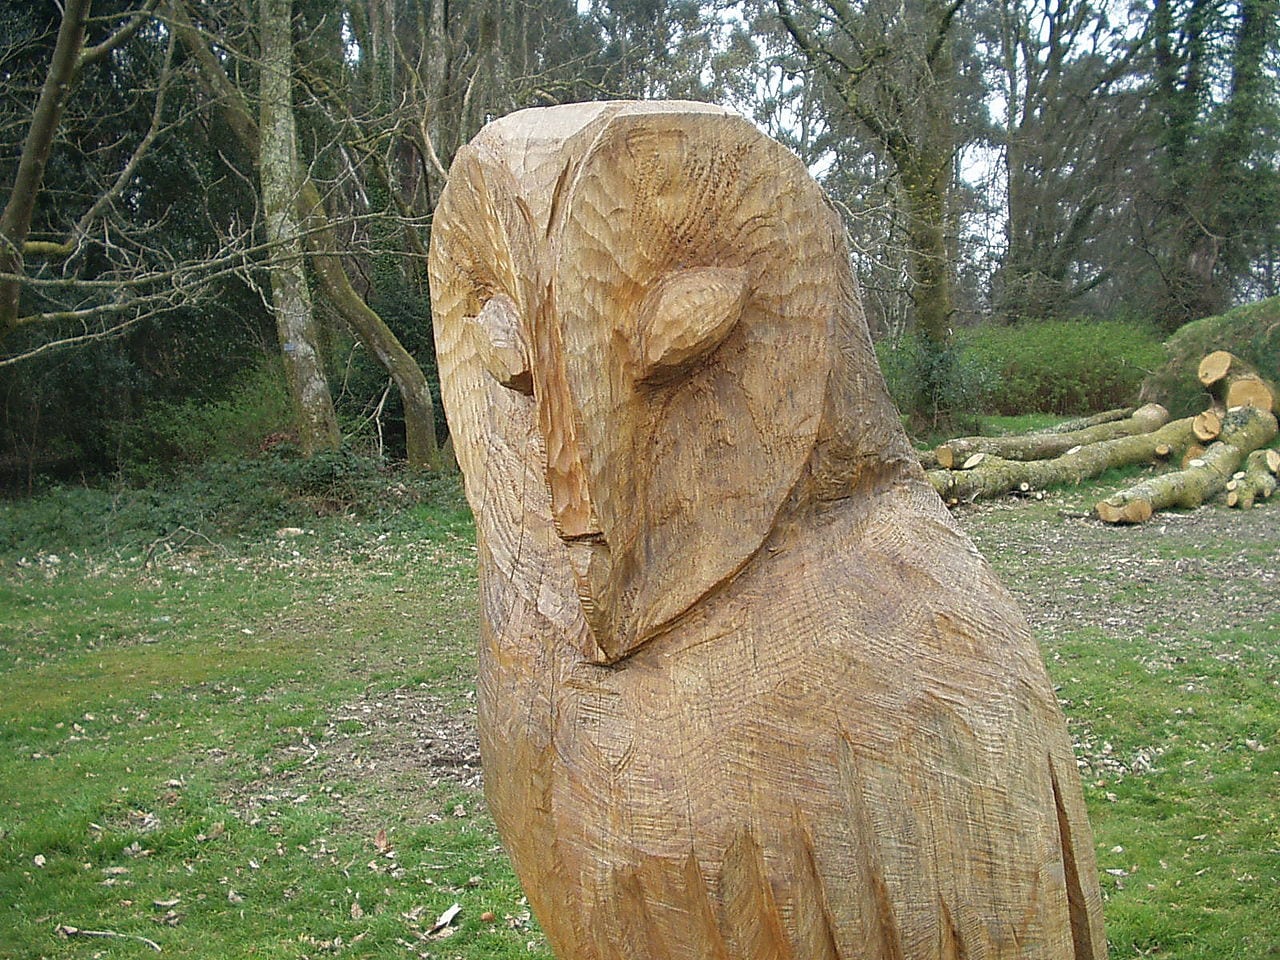 Wood carving - Wikipedia